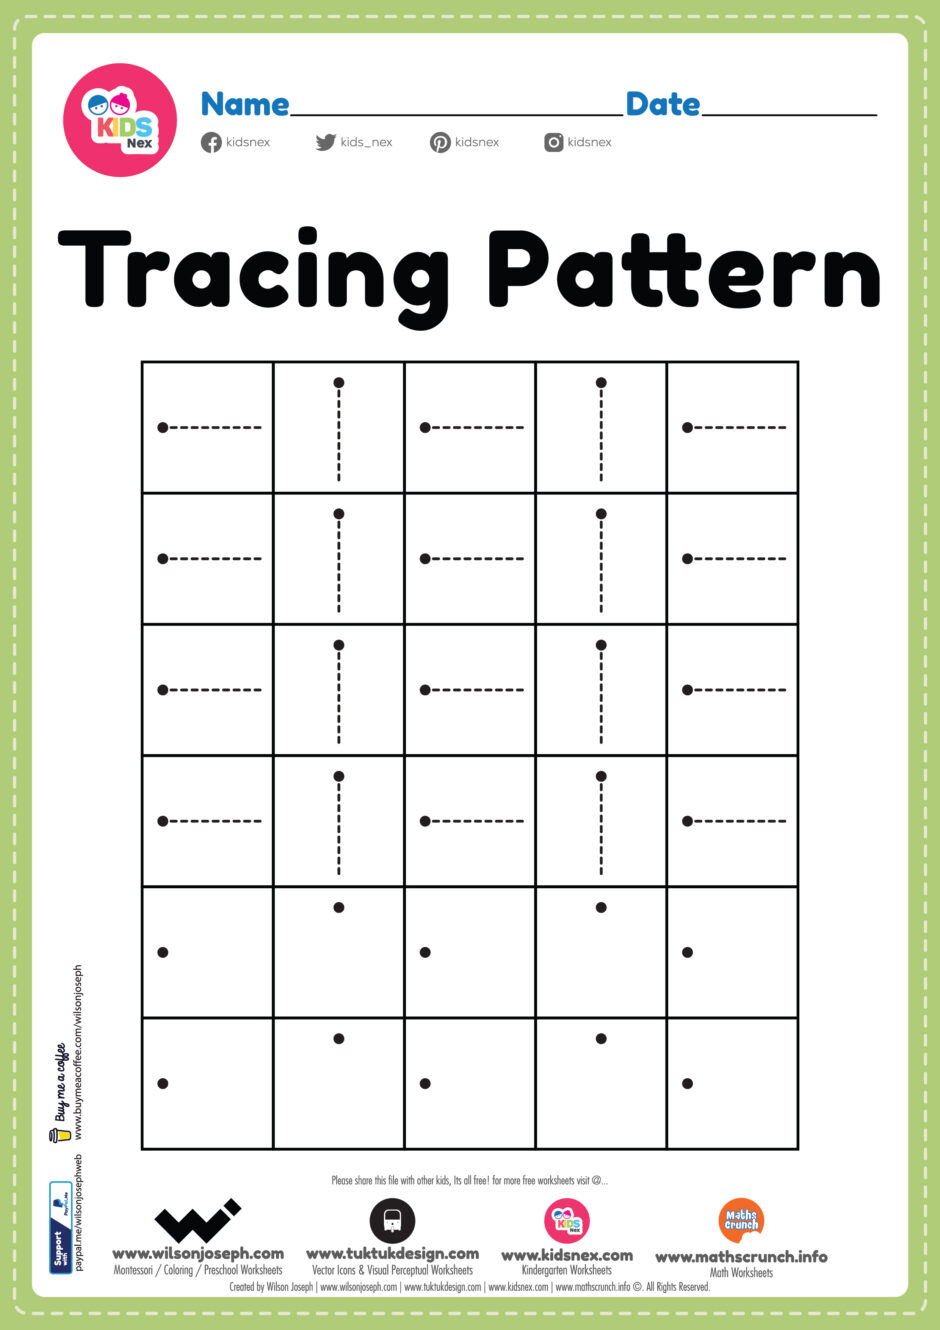 Tracing Pattern Sleeping and Standing Line Worksheet